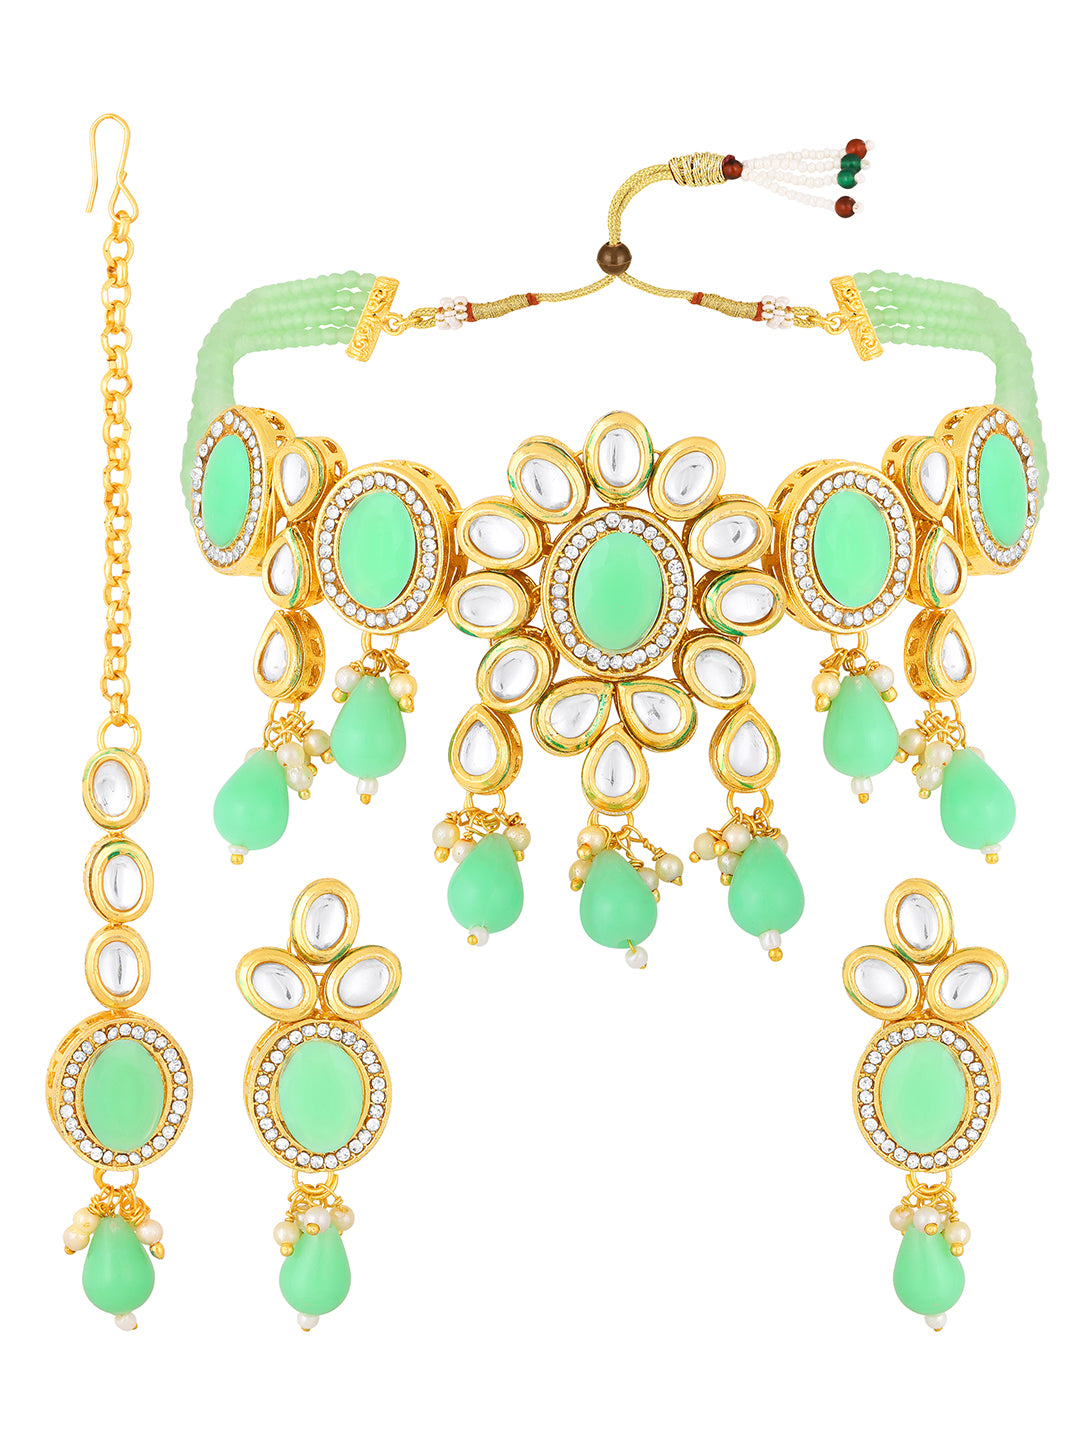 Stunning Gold Toned Kundan Jewellery Set For Bride To Be